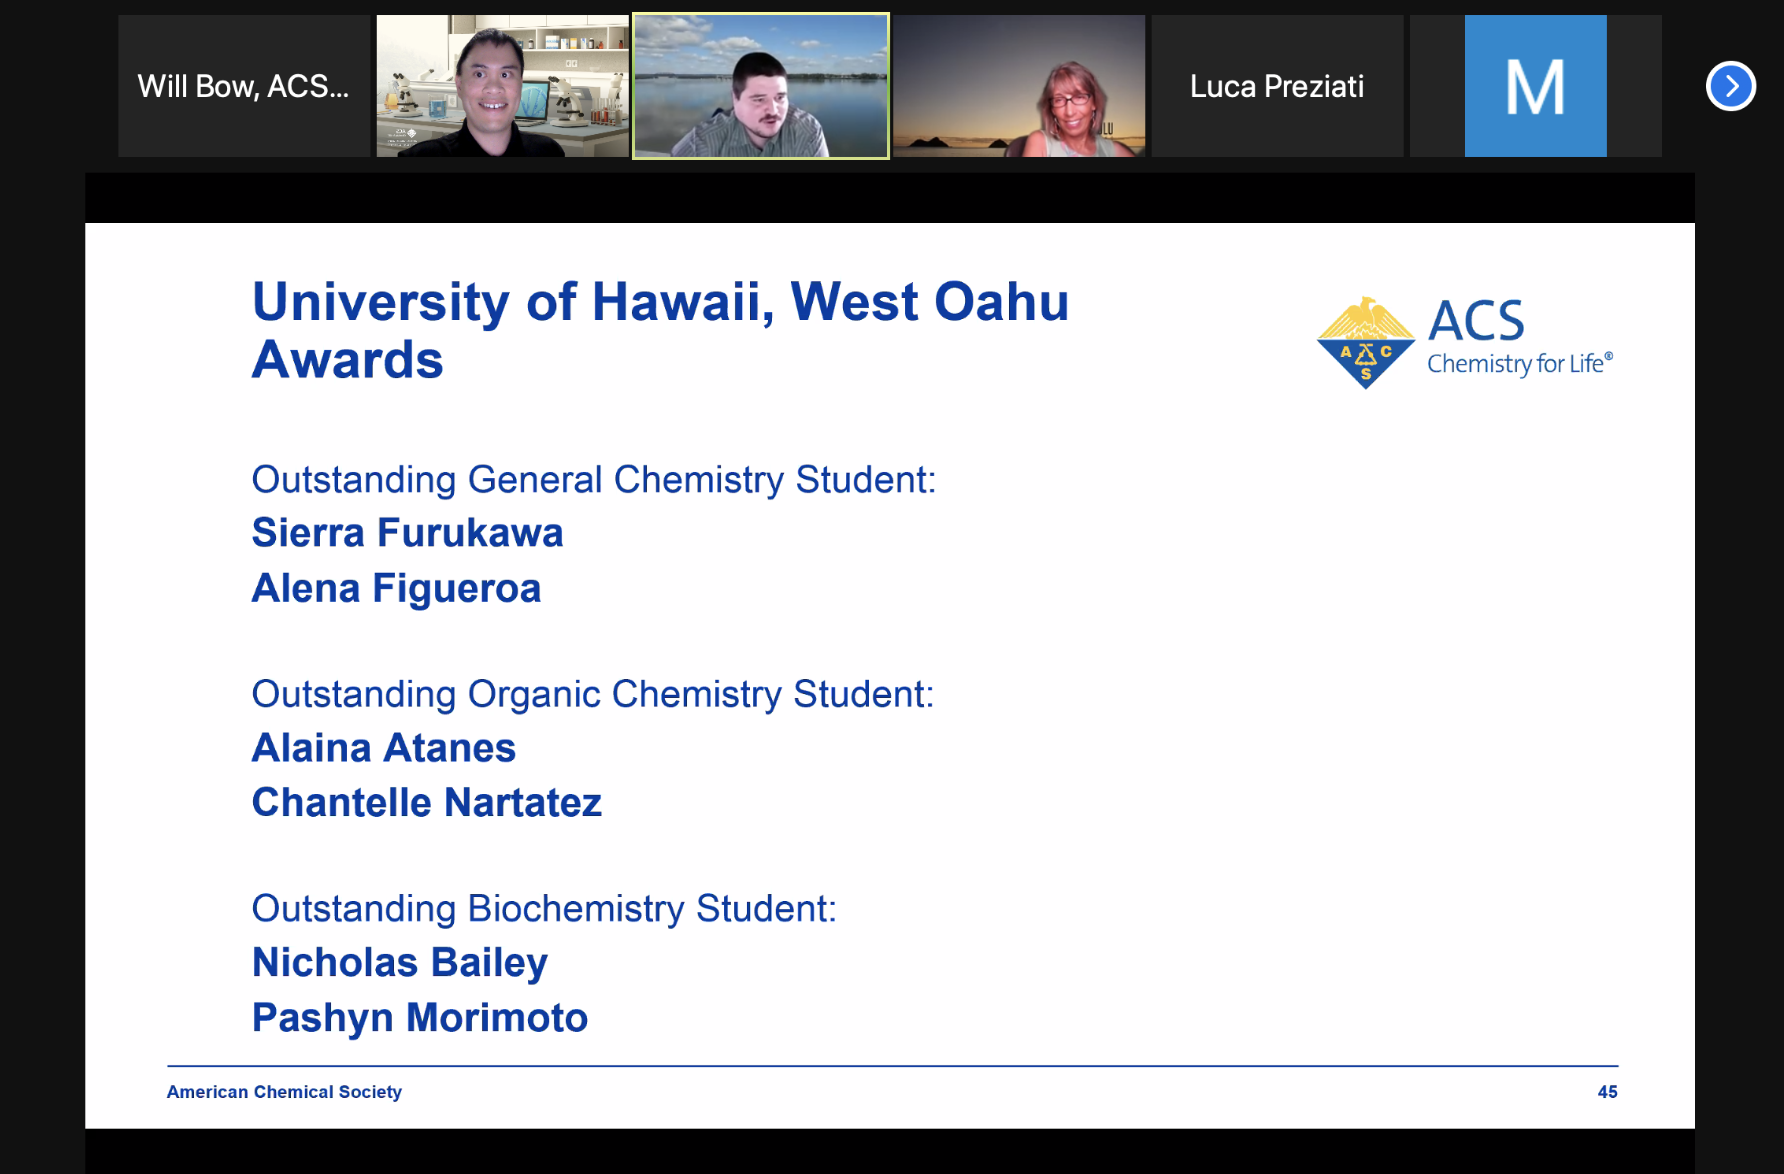 A screenshot of award recipients from a virtual ceremony.